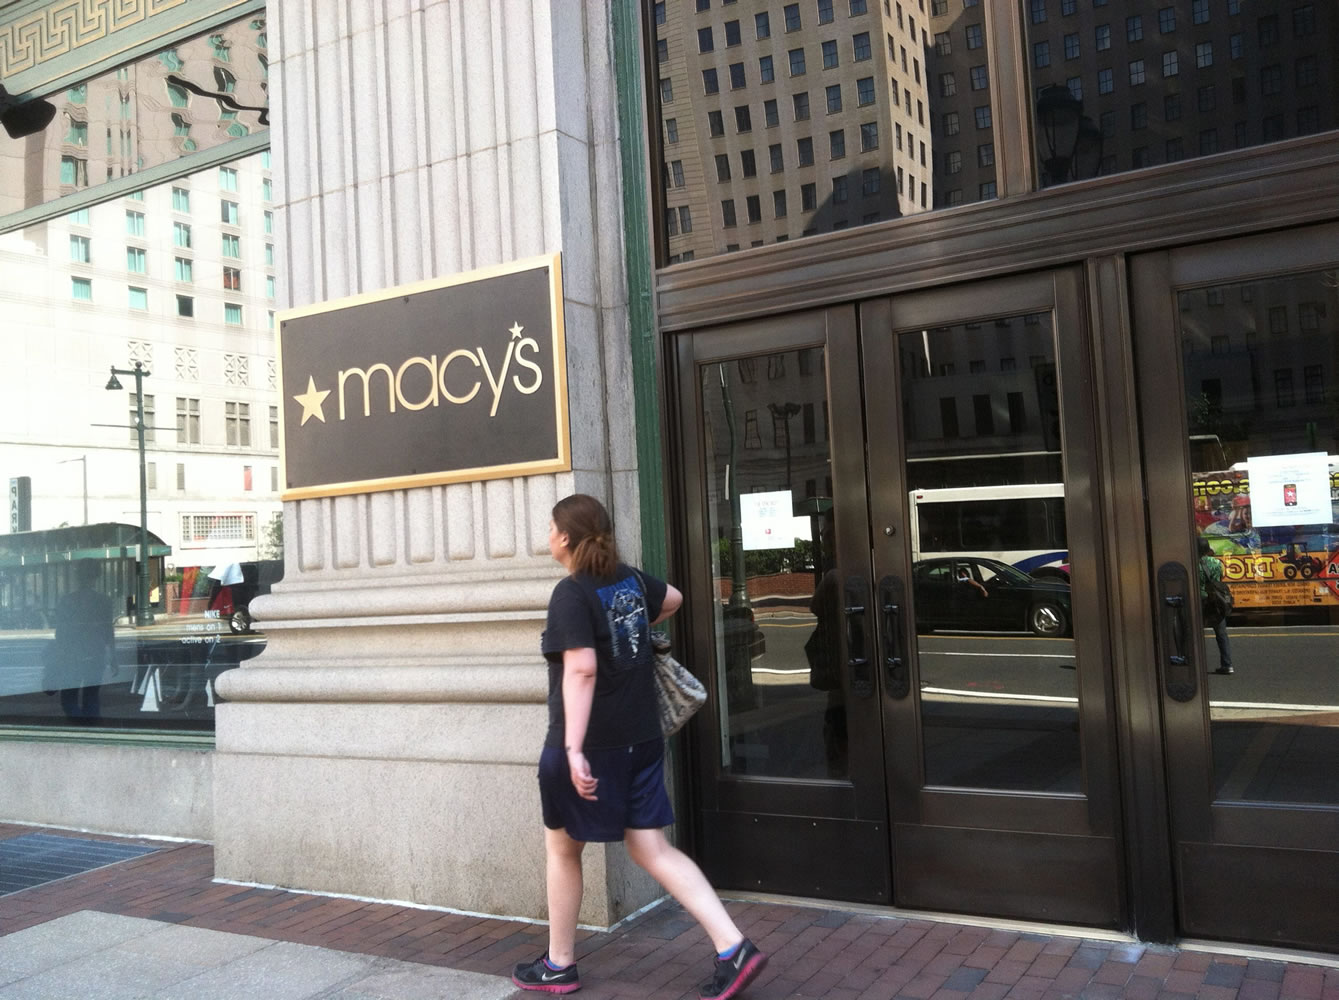 While this standalone Macy&#039;s store in Center City does well, others are not faring as well in many malls. Macy&#039;s Corp. plans to close up to 40 stores by early this year.